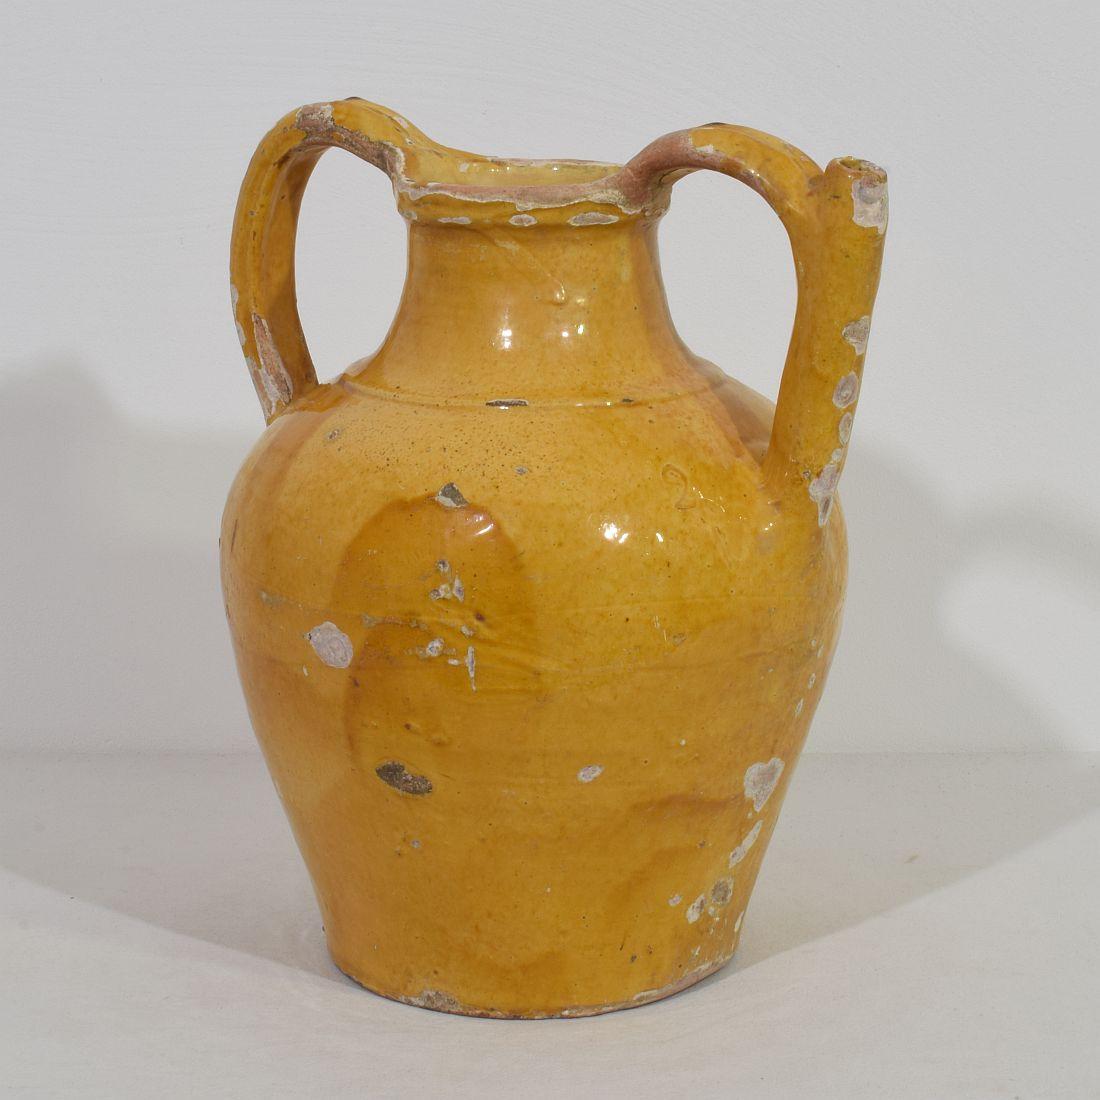 Great authentic and extremely rare piece of pottery with a spout in handle from the Provence called : Orjol du Lauragais. Beautiful weathered yellow glaze. Imperfections help authenticate this water cruche as it was a utilitarian type piece, France,